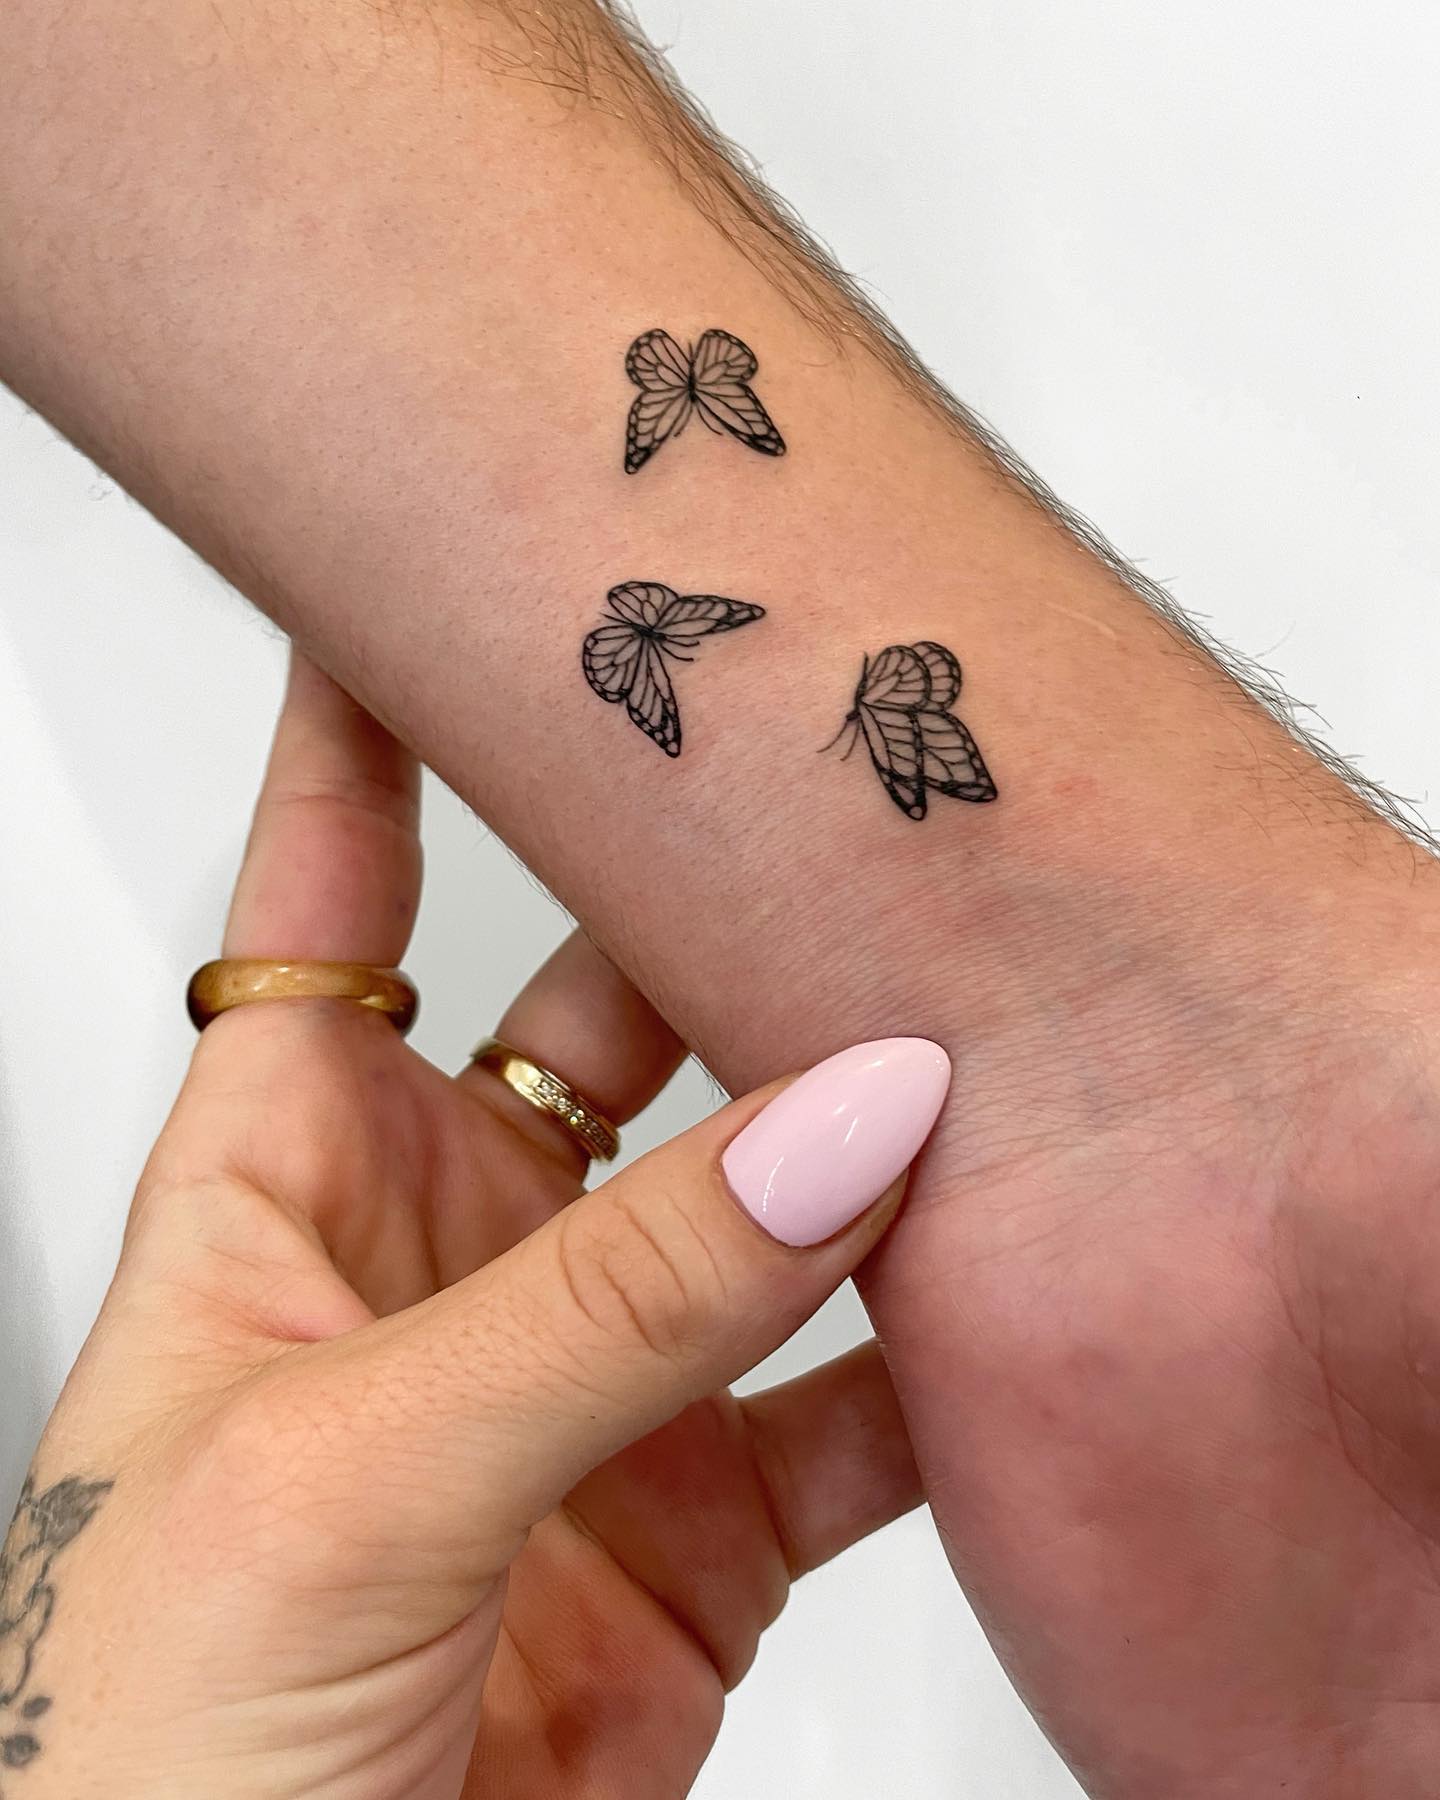 Wrist tattoo ideas with meaning